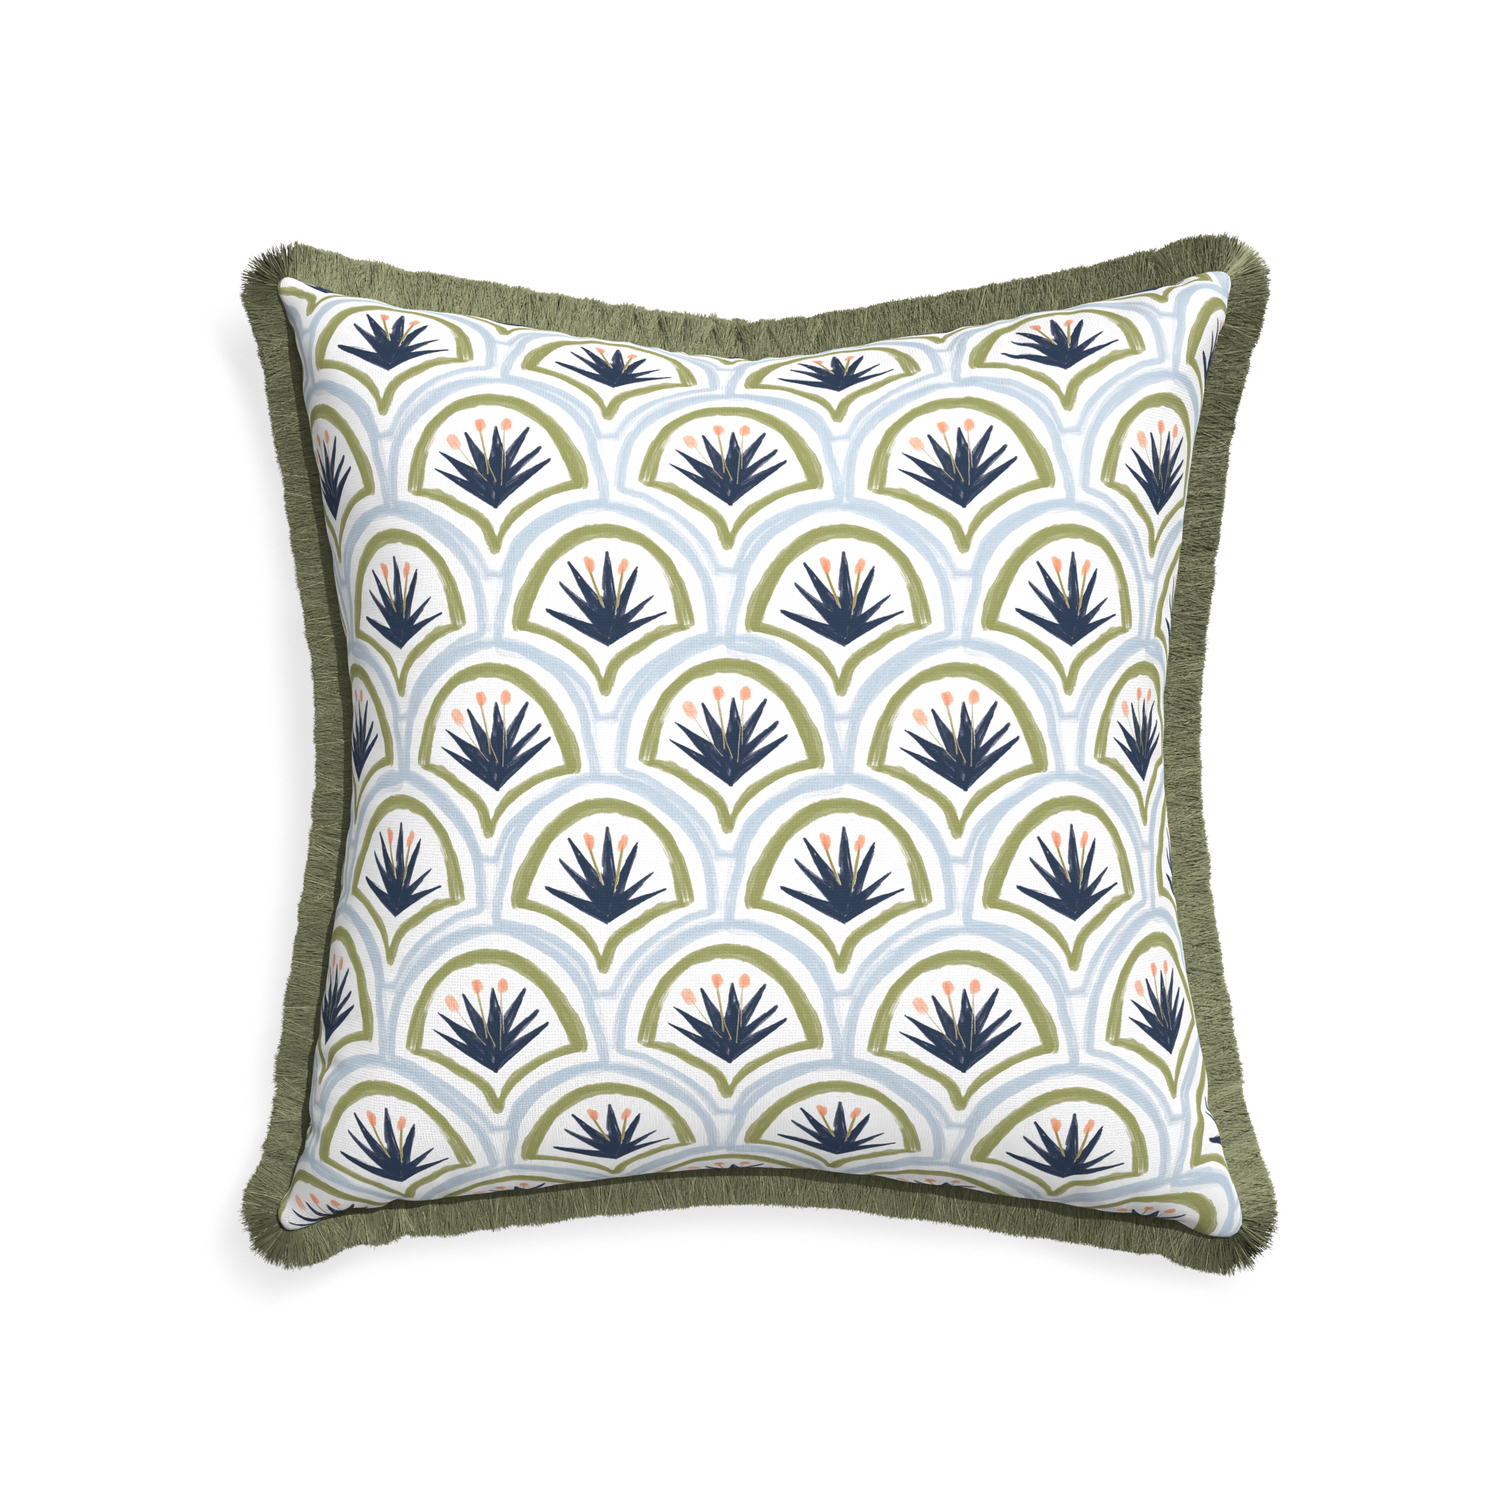 22-square thatcher midnight custom art deco palm patternpillow with sage fringe on white background